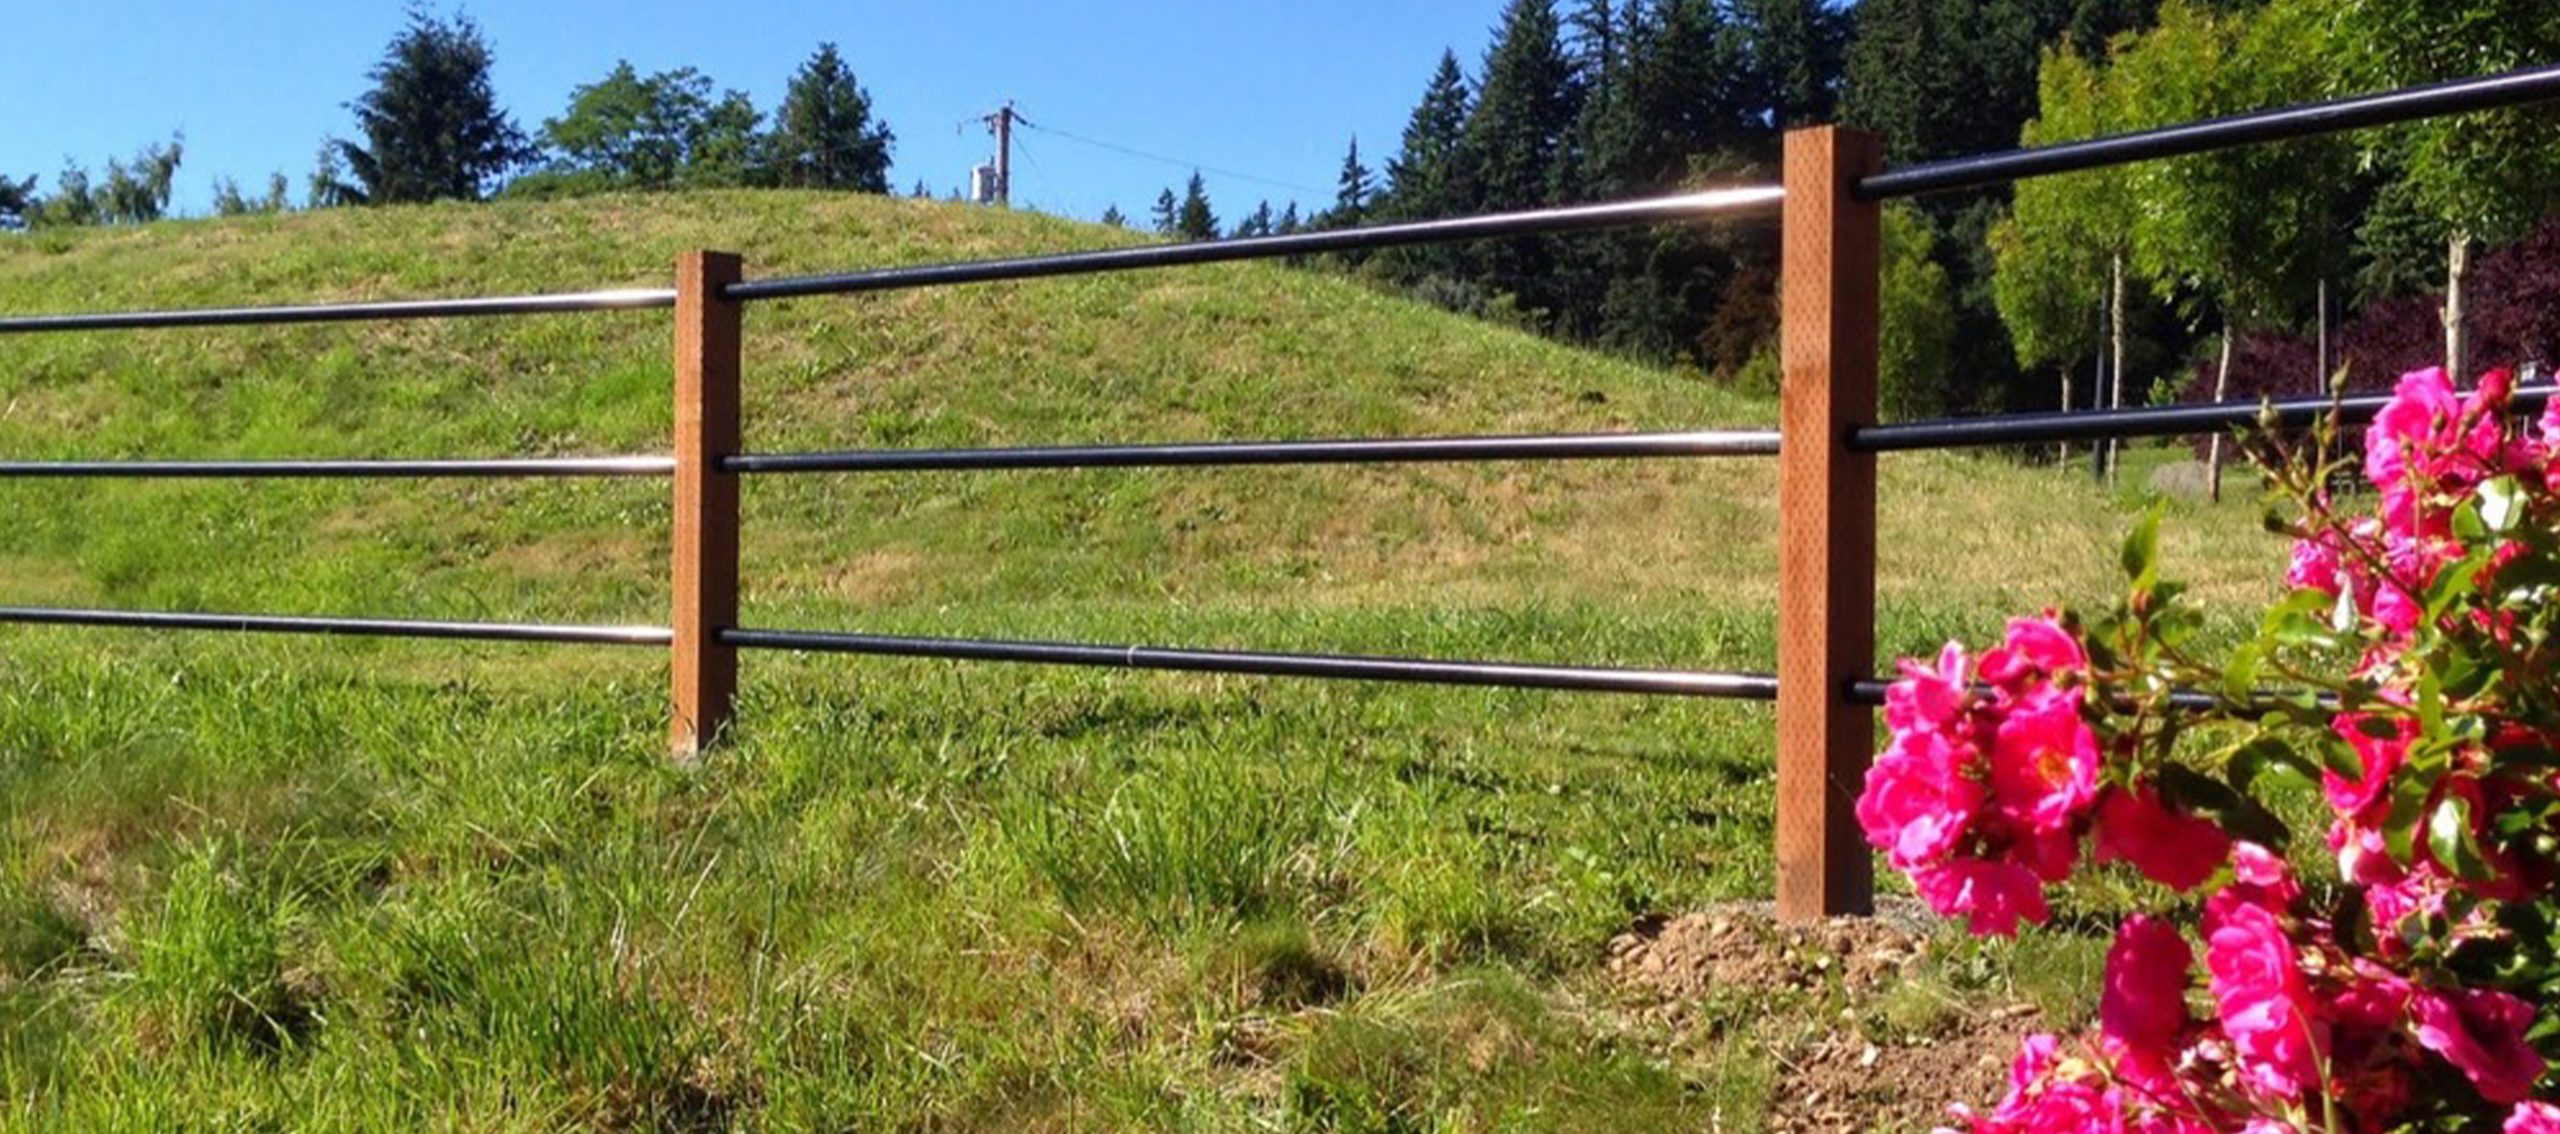 Pipe Rail Fencing